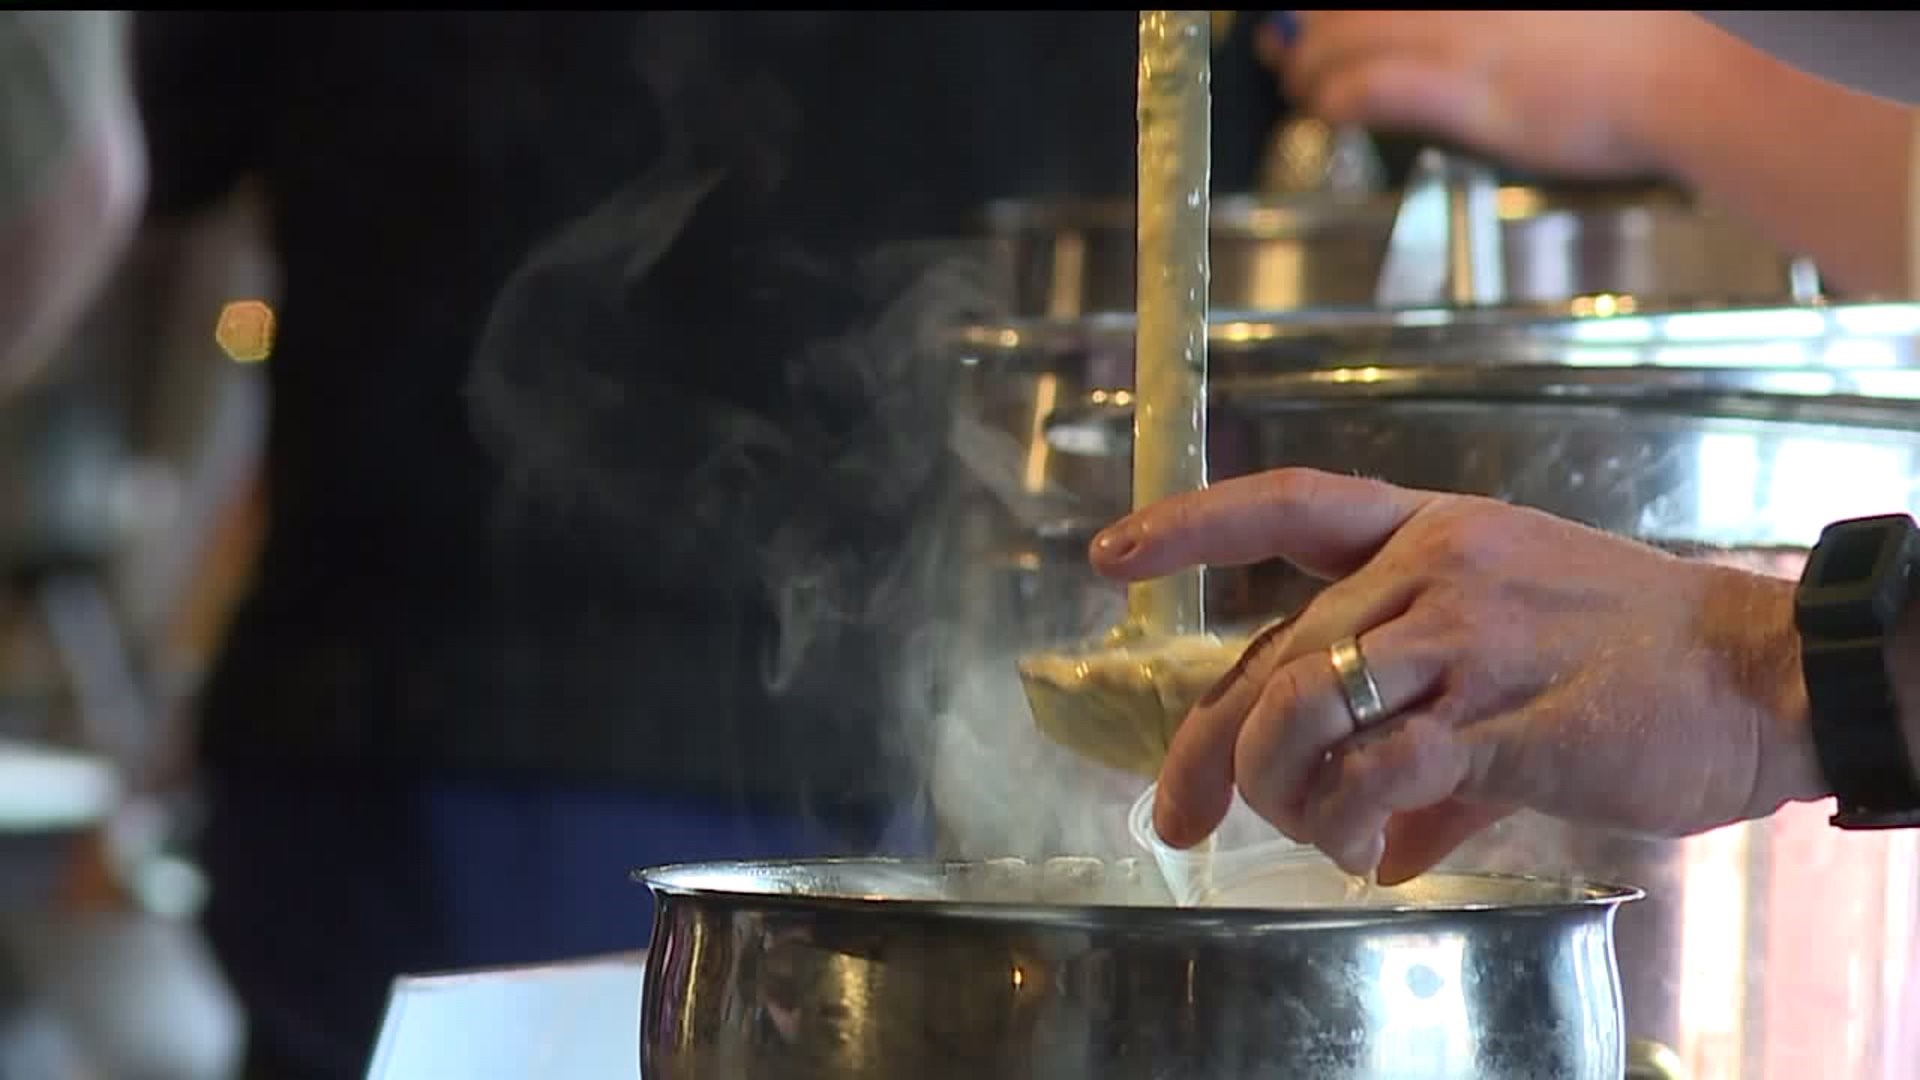 Soup Cookoff event raises money for rare disorder